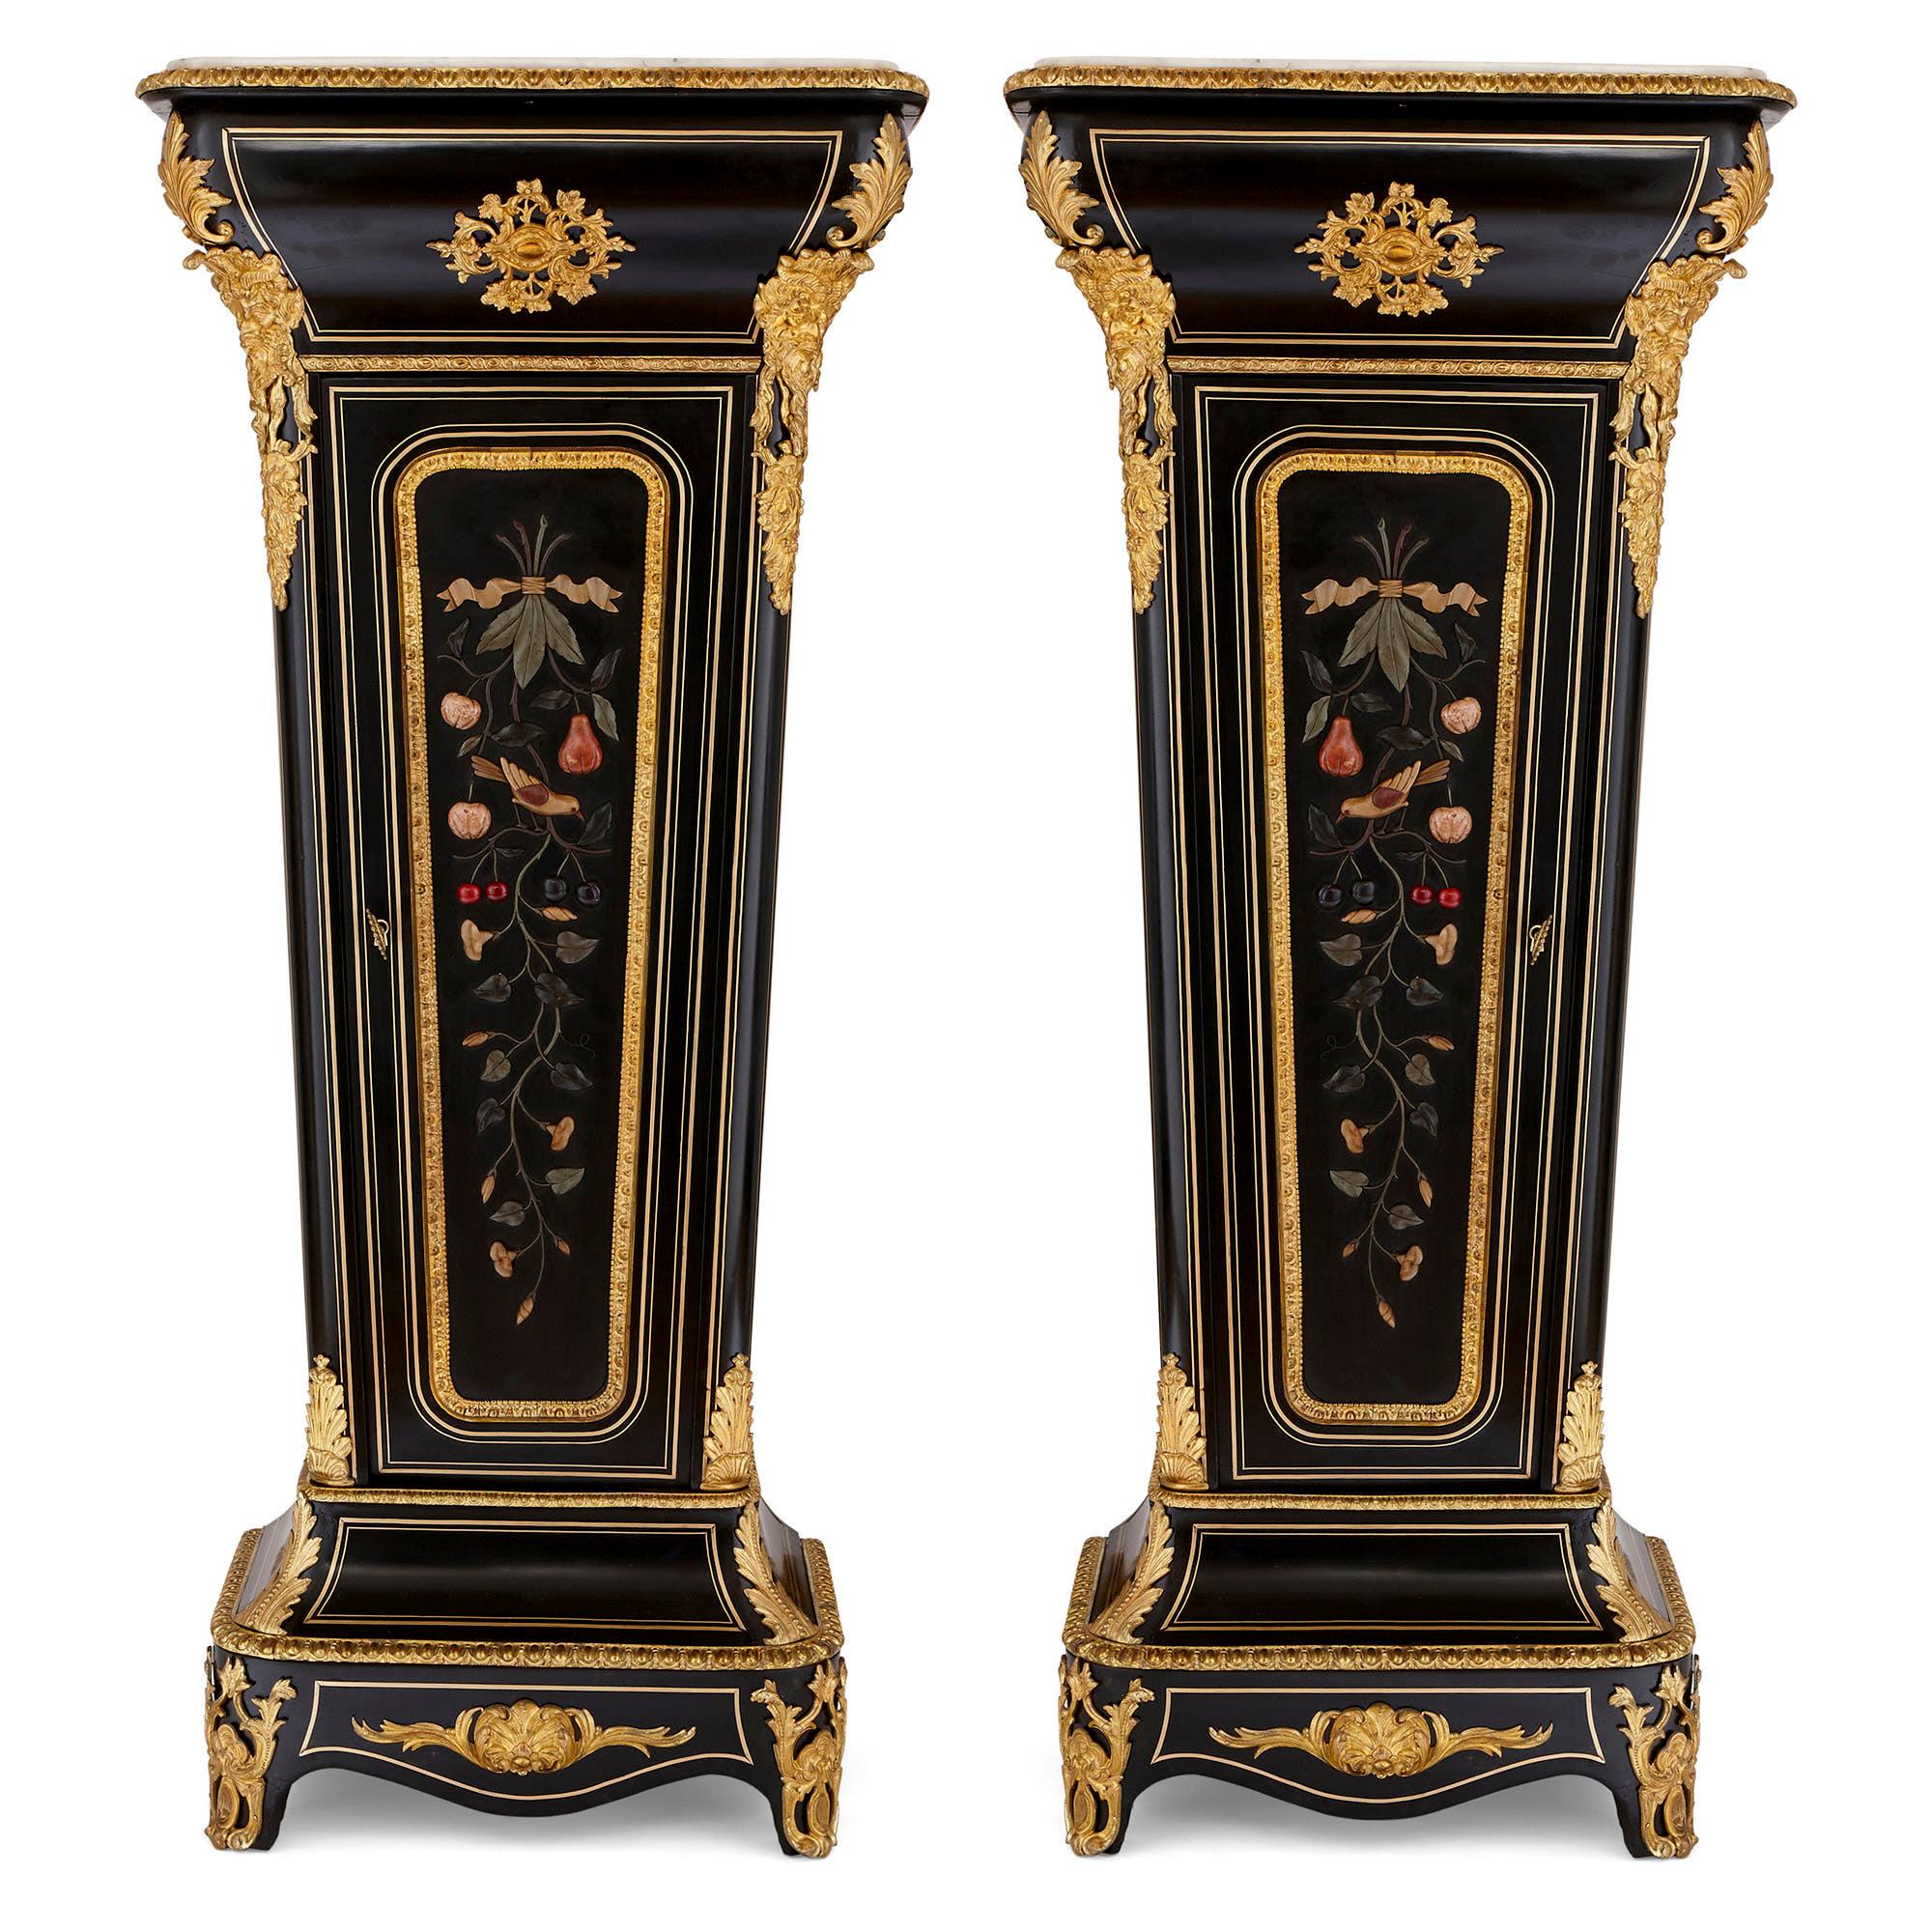 These pedestal-cabinets are sophisticated pieces of antique French furniture. They are crafted from ebonised wood which is inlaid with brass and mounted with decorative gilt bronze (ormolu) motifs and hardstone designs. 

The pedestals are of